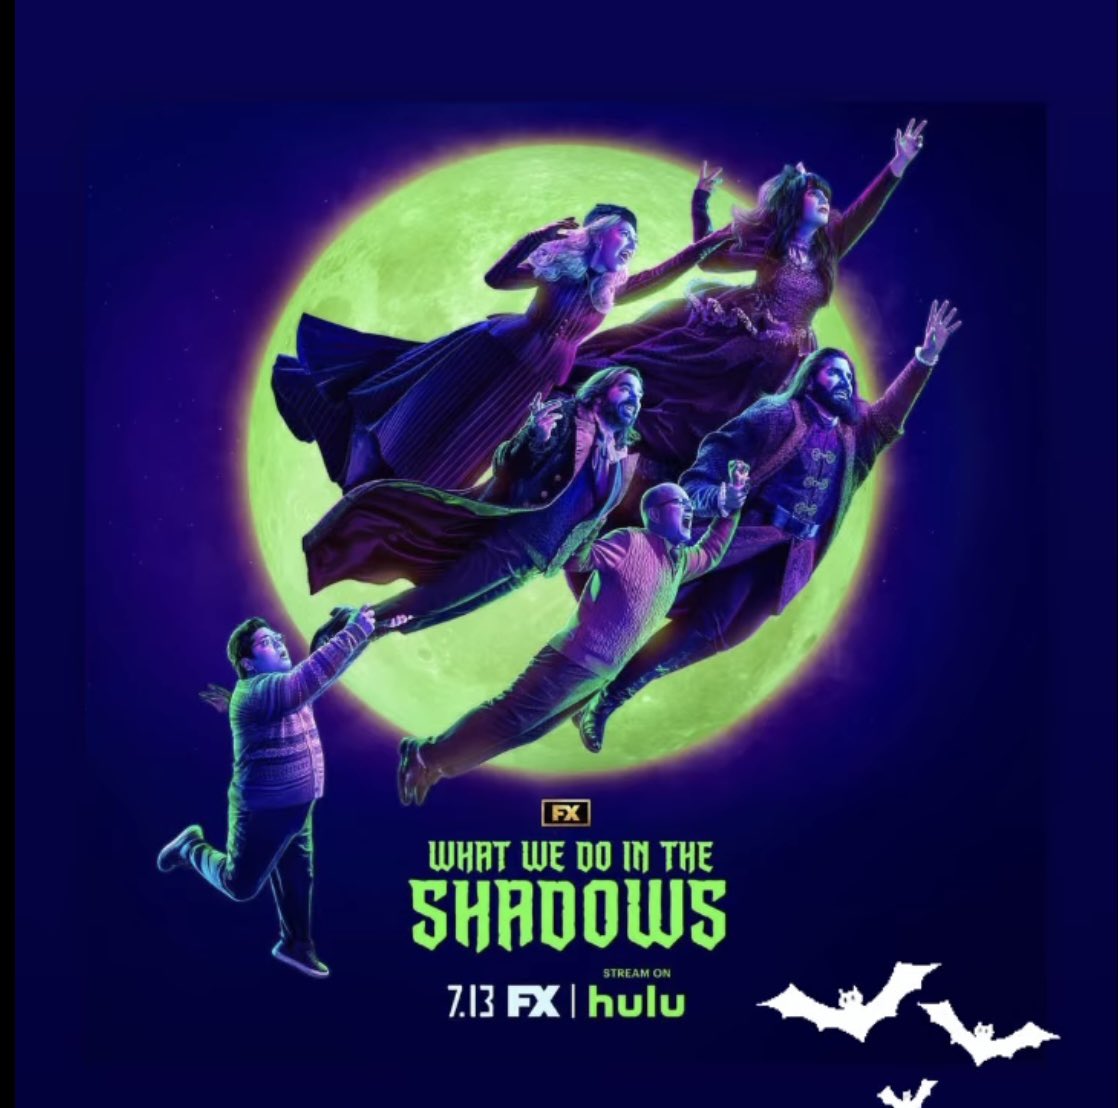 What We Do In The Shadows returns with a new season 5 tonight on FX, then streaming on Hulu!! My Baron Afanas will also return in 3 episodes this season, in all my rejuvenated glory. @theshadowsfx @FXNetworks @hulu